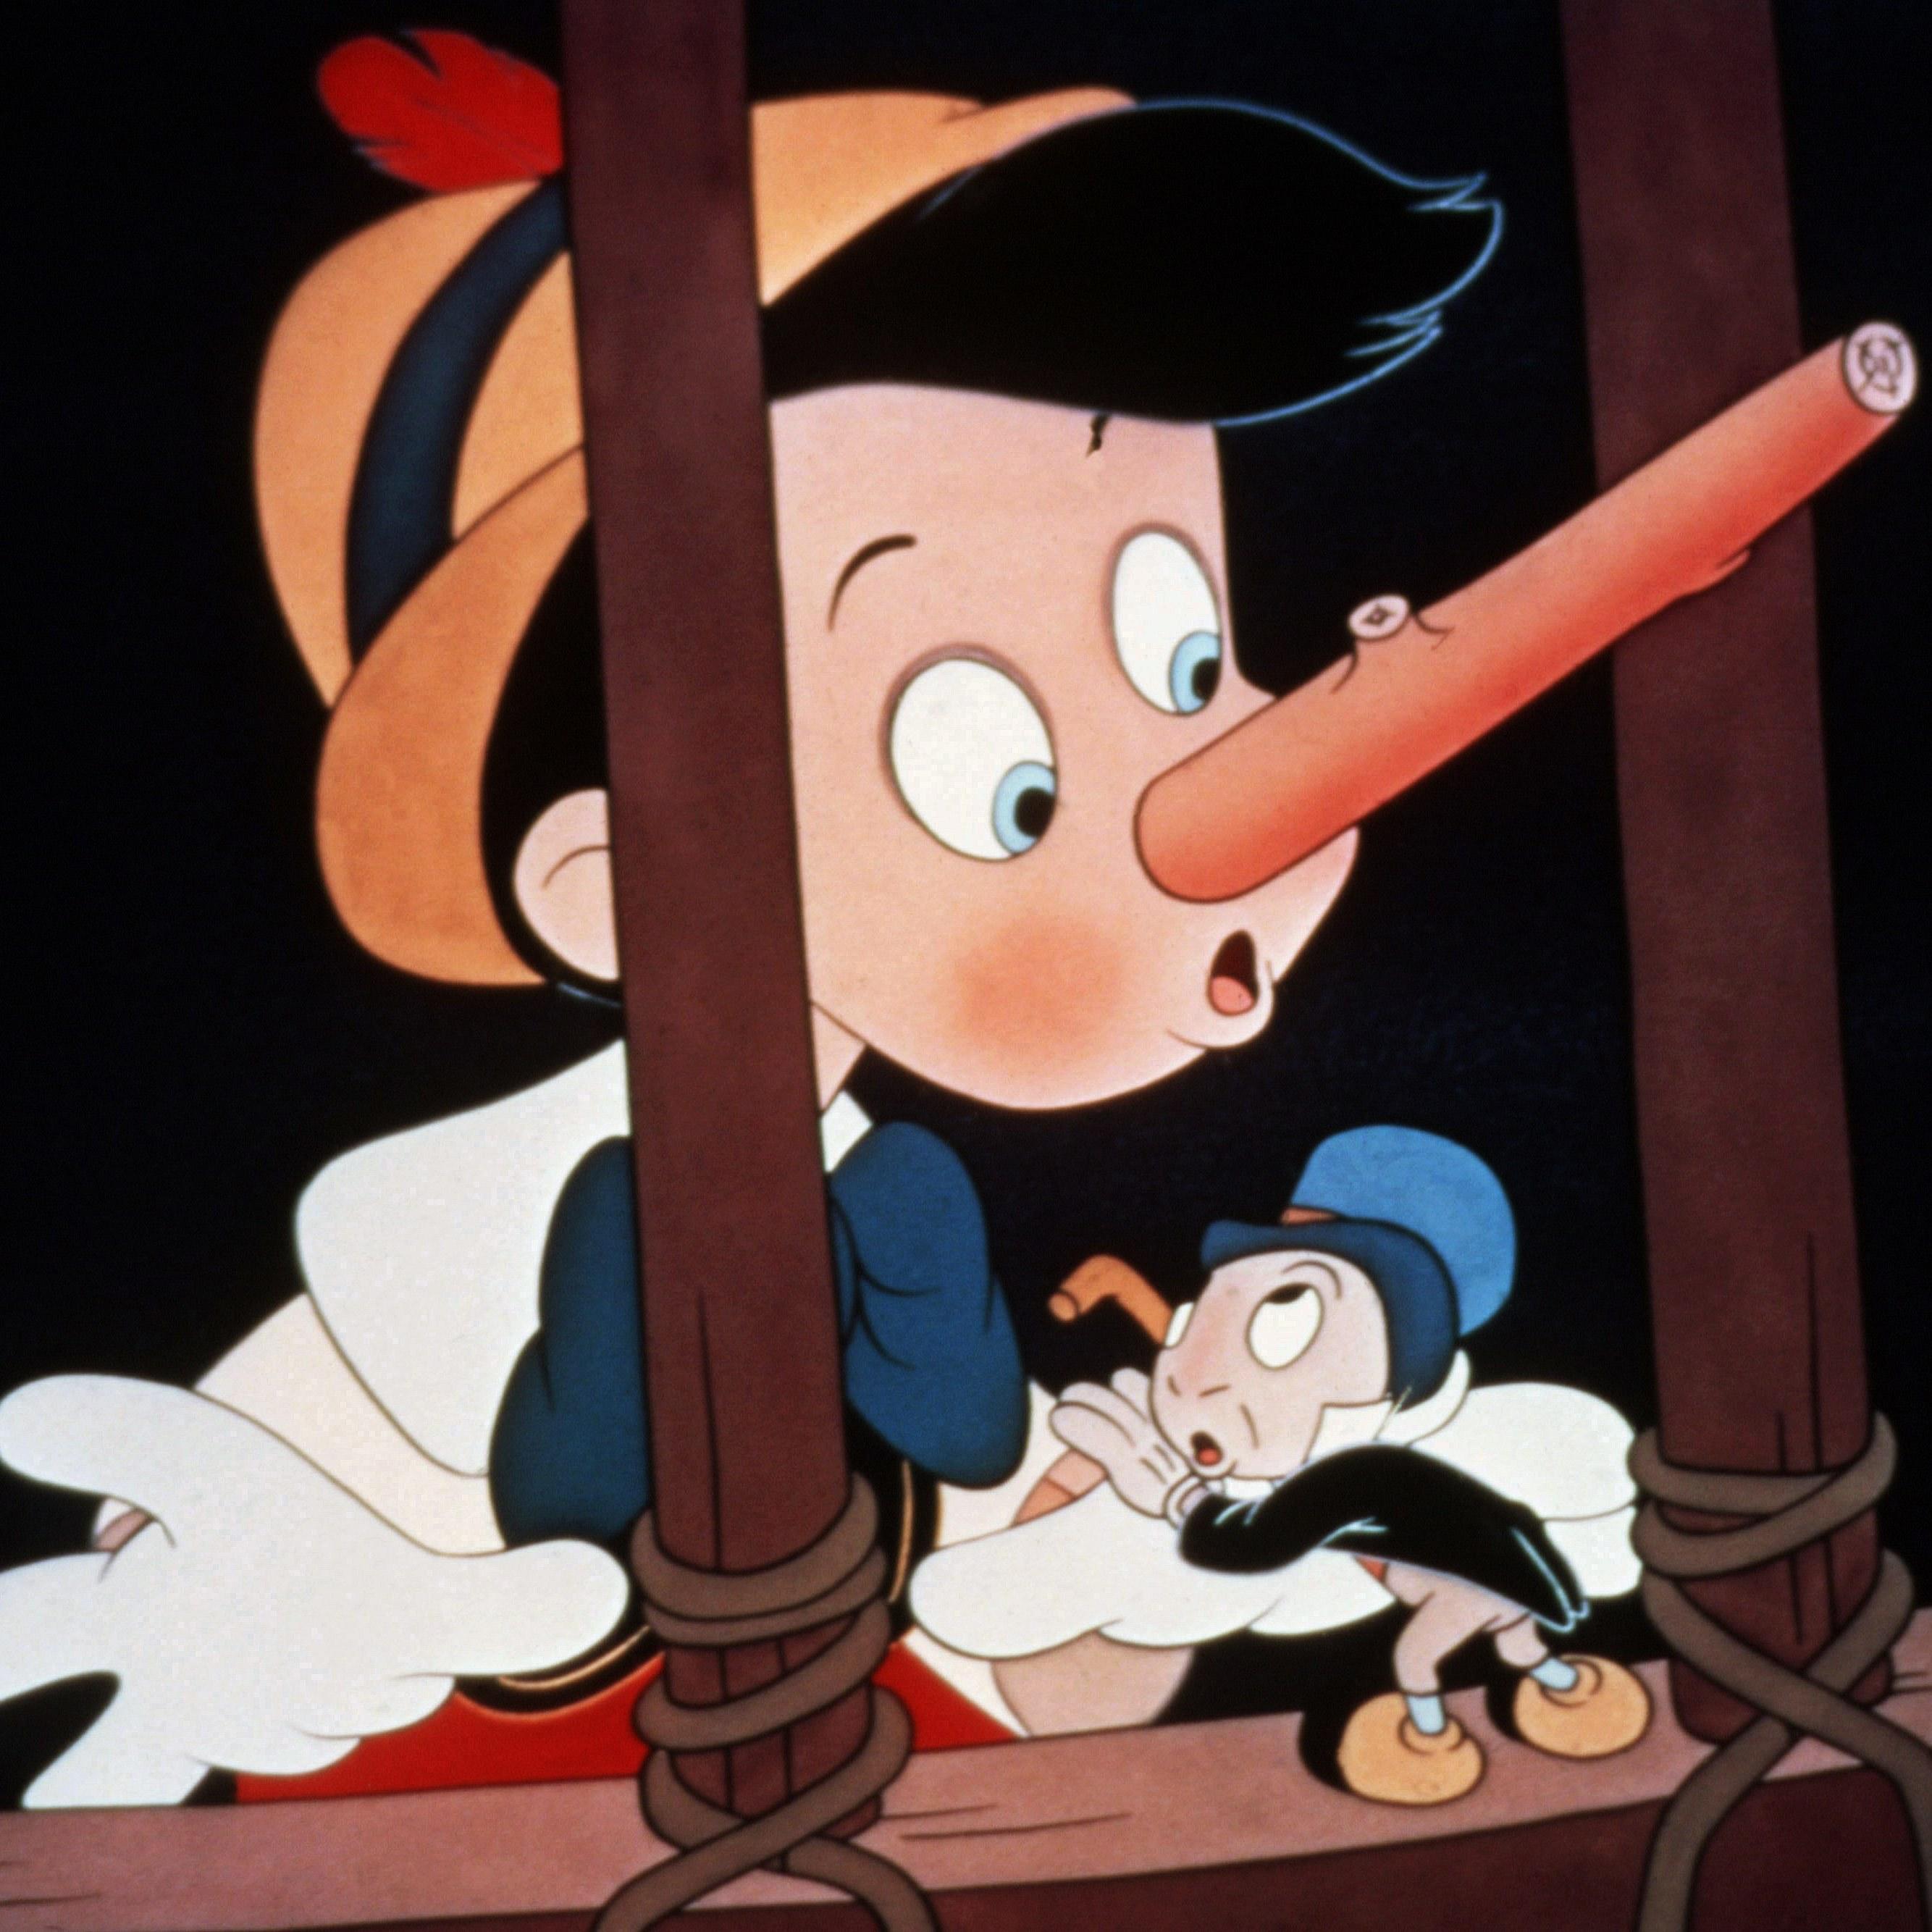 New "Pinocchio" Animated Movie Will Be Directed by Guillermo del Toro